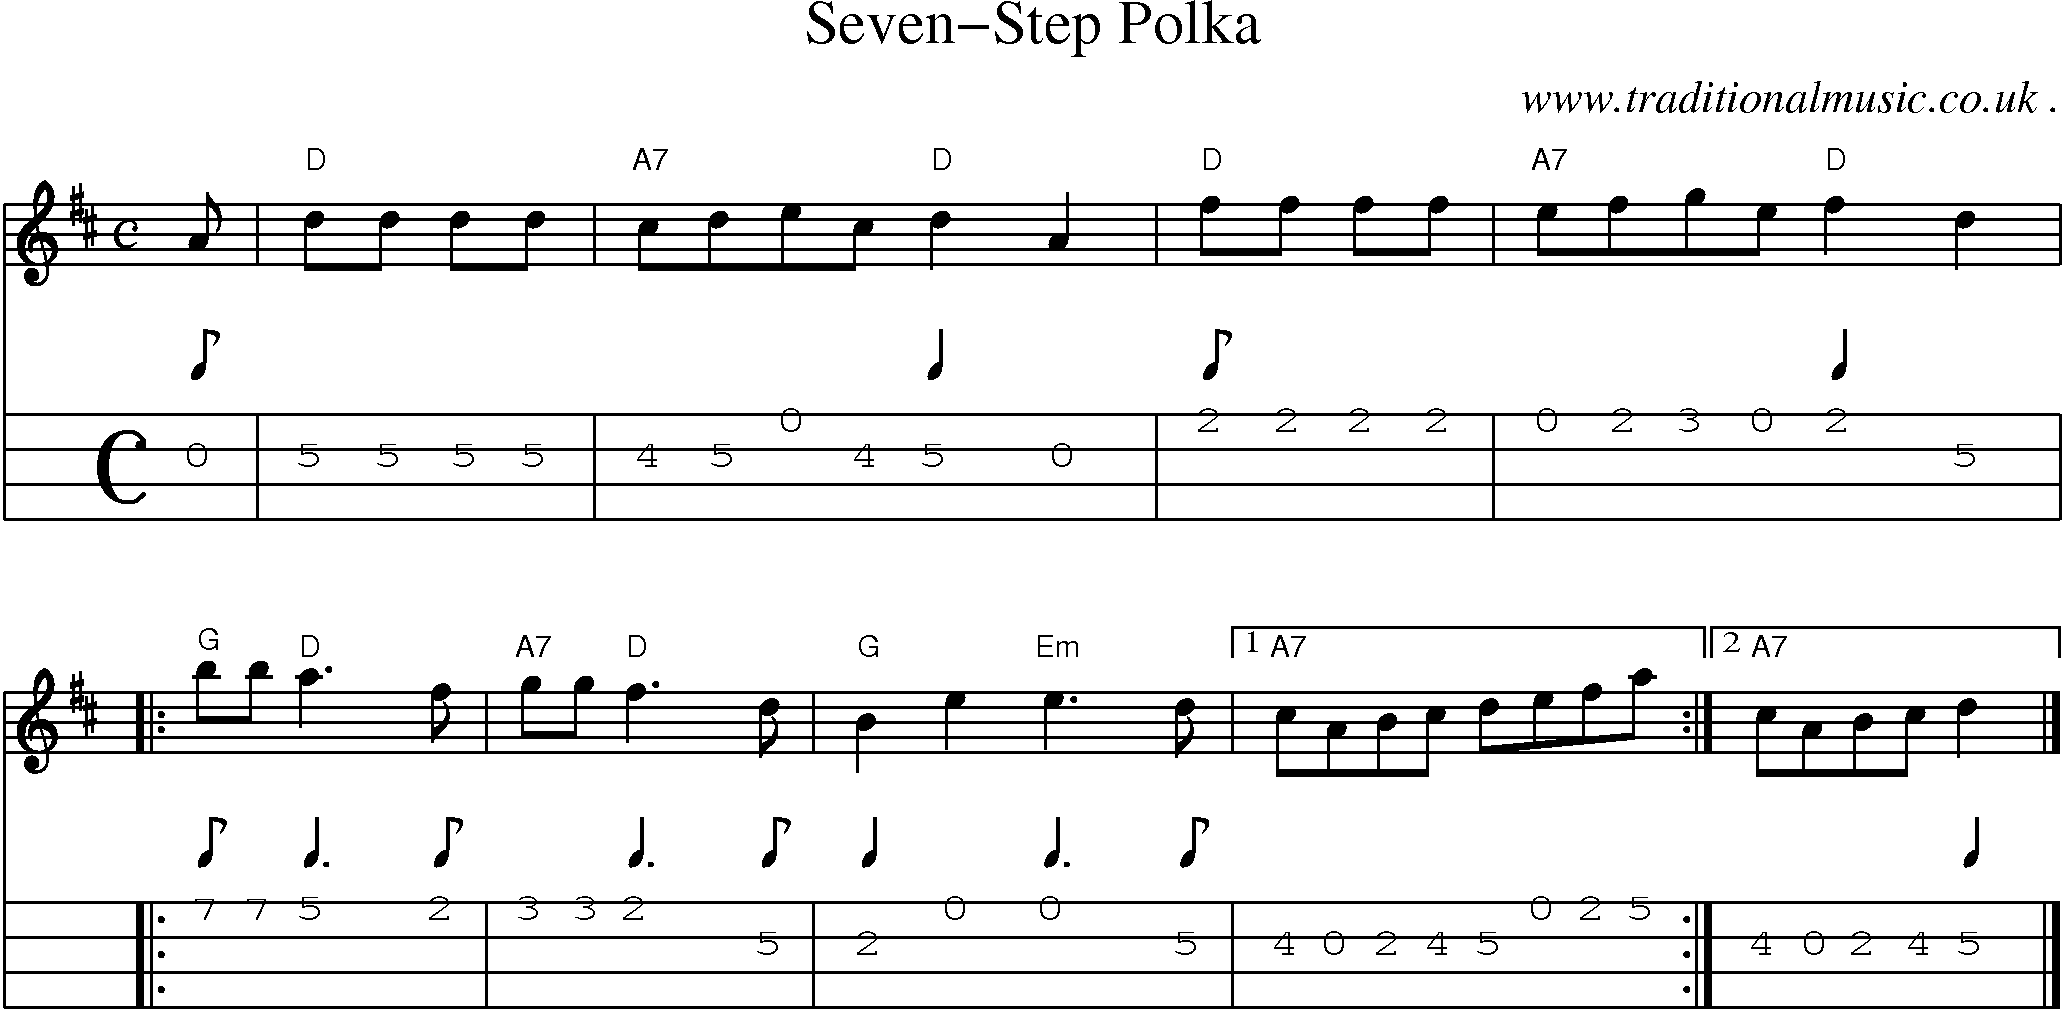 Sheet-music  score, Chords and Mandolin Tabs for Seven-step Polka